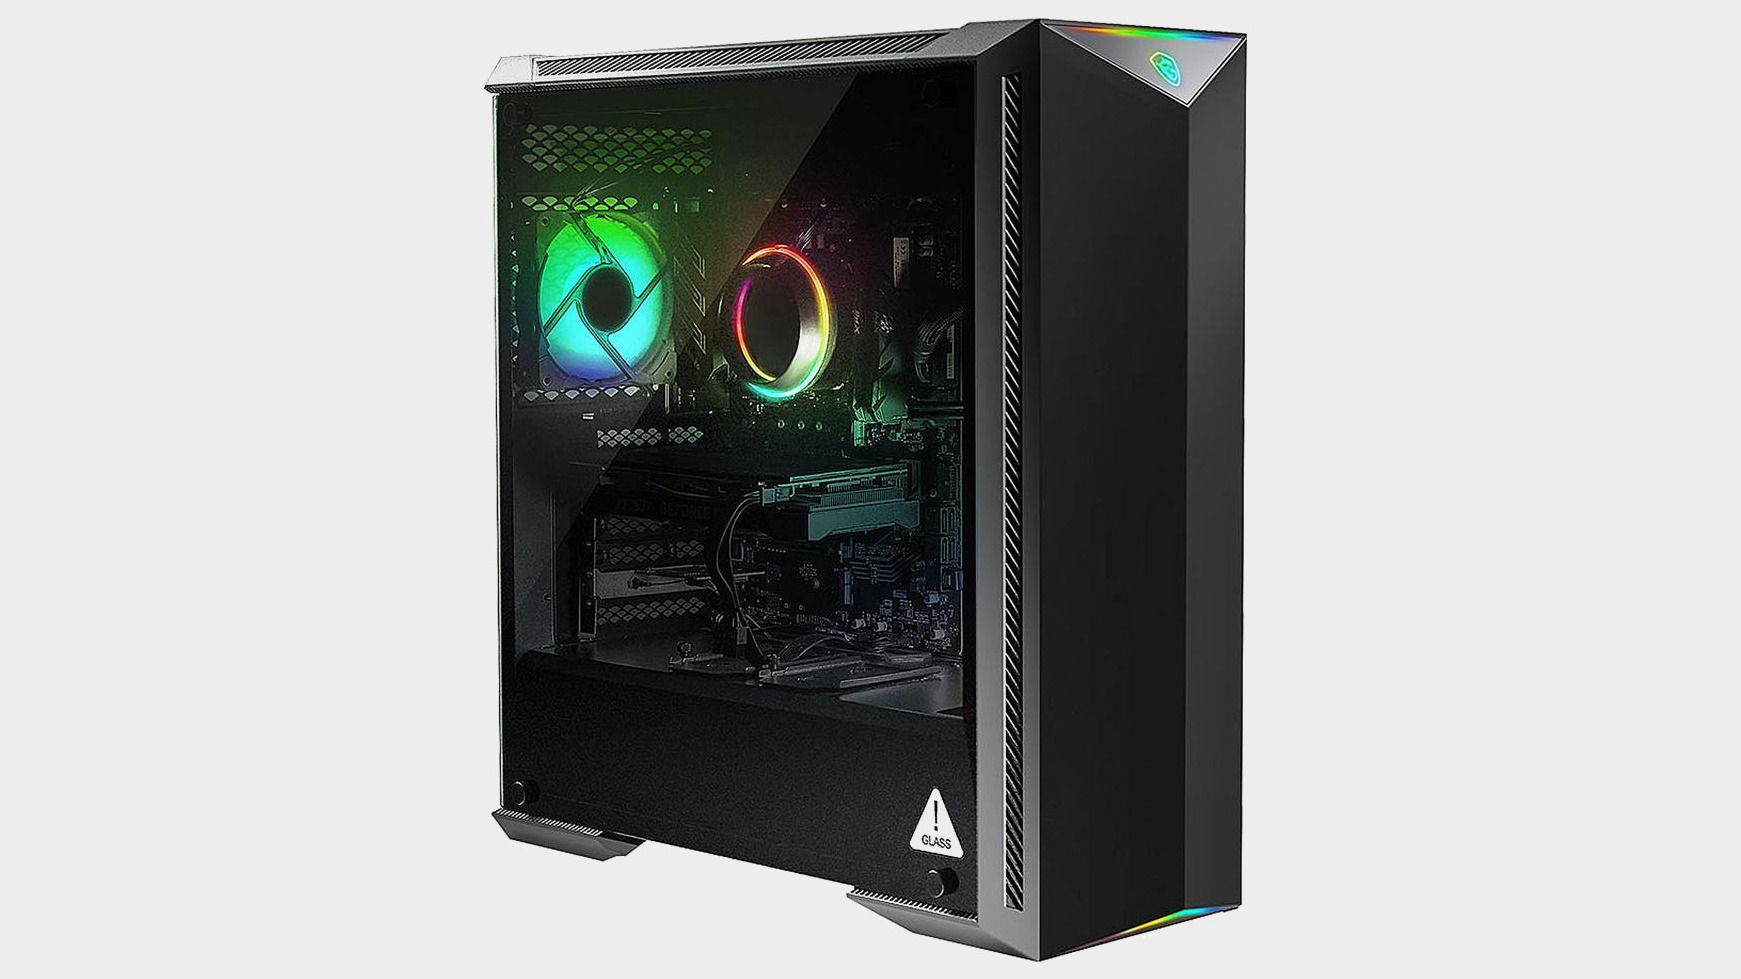  This gaming PC with an RTX 2080 is on sale for $1,270 